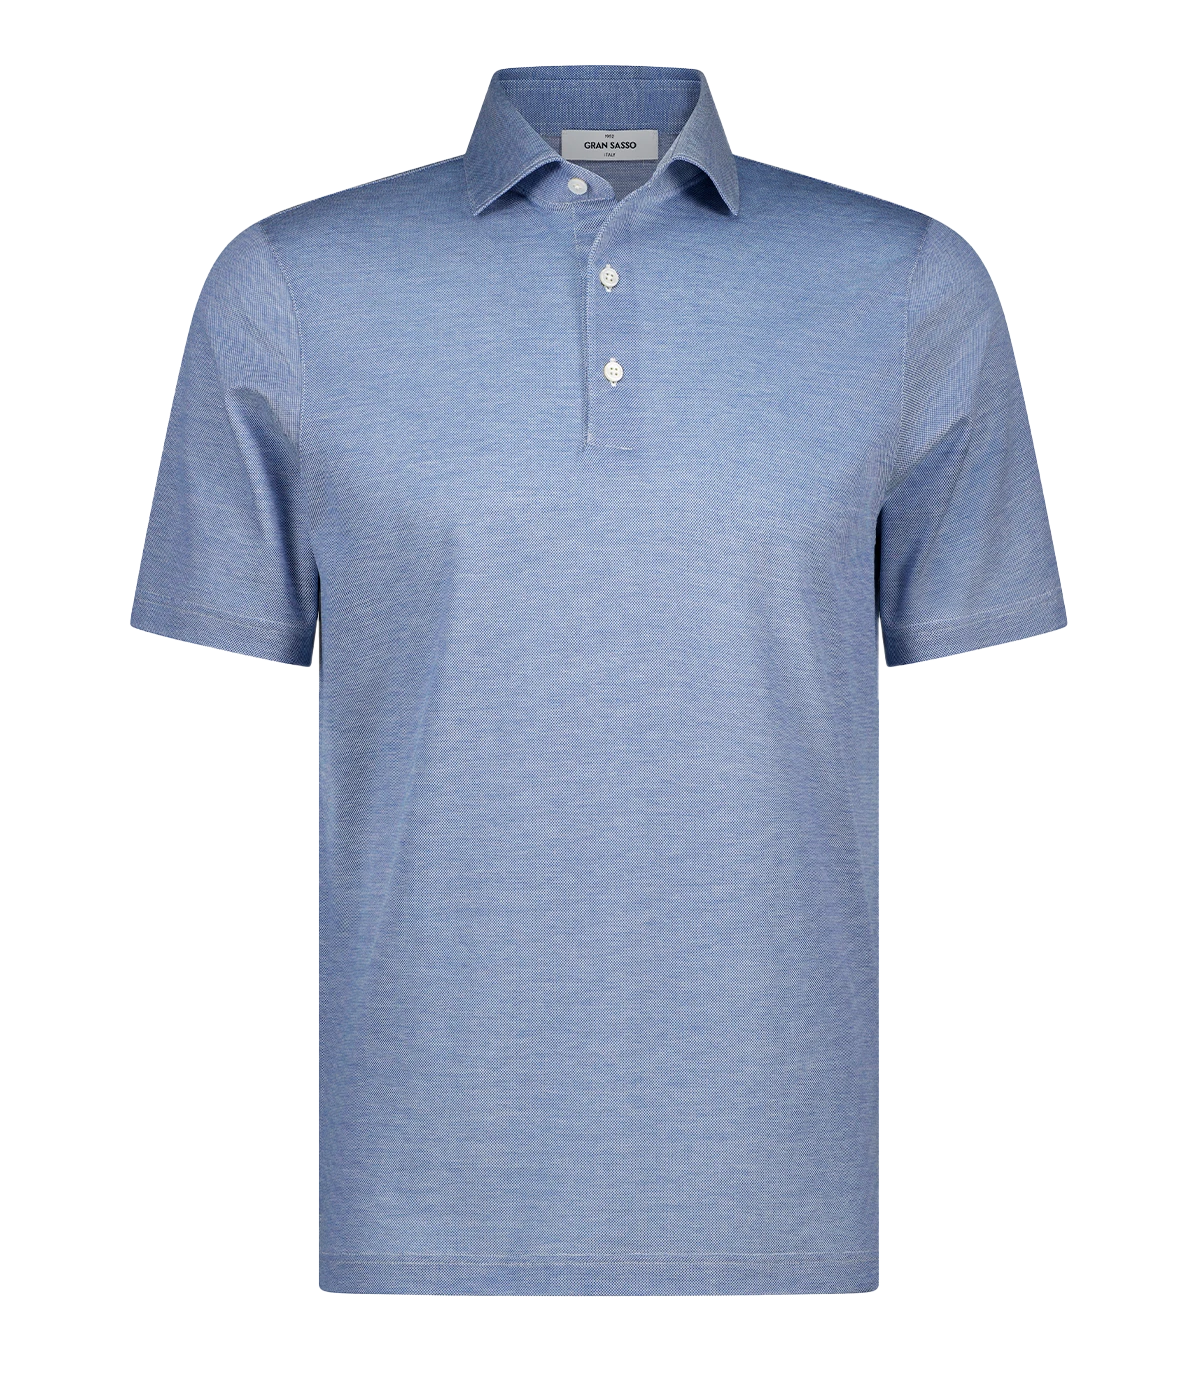 A timeless classic short sleeve polo in a light blue, featuring a light weight cotton material, three button detail and collar. Sporty Polo, comfortable, made in Italy, throw on and go. 